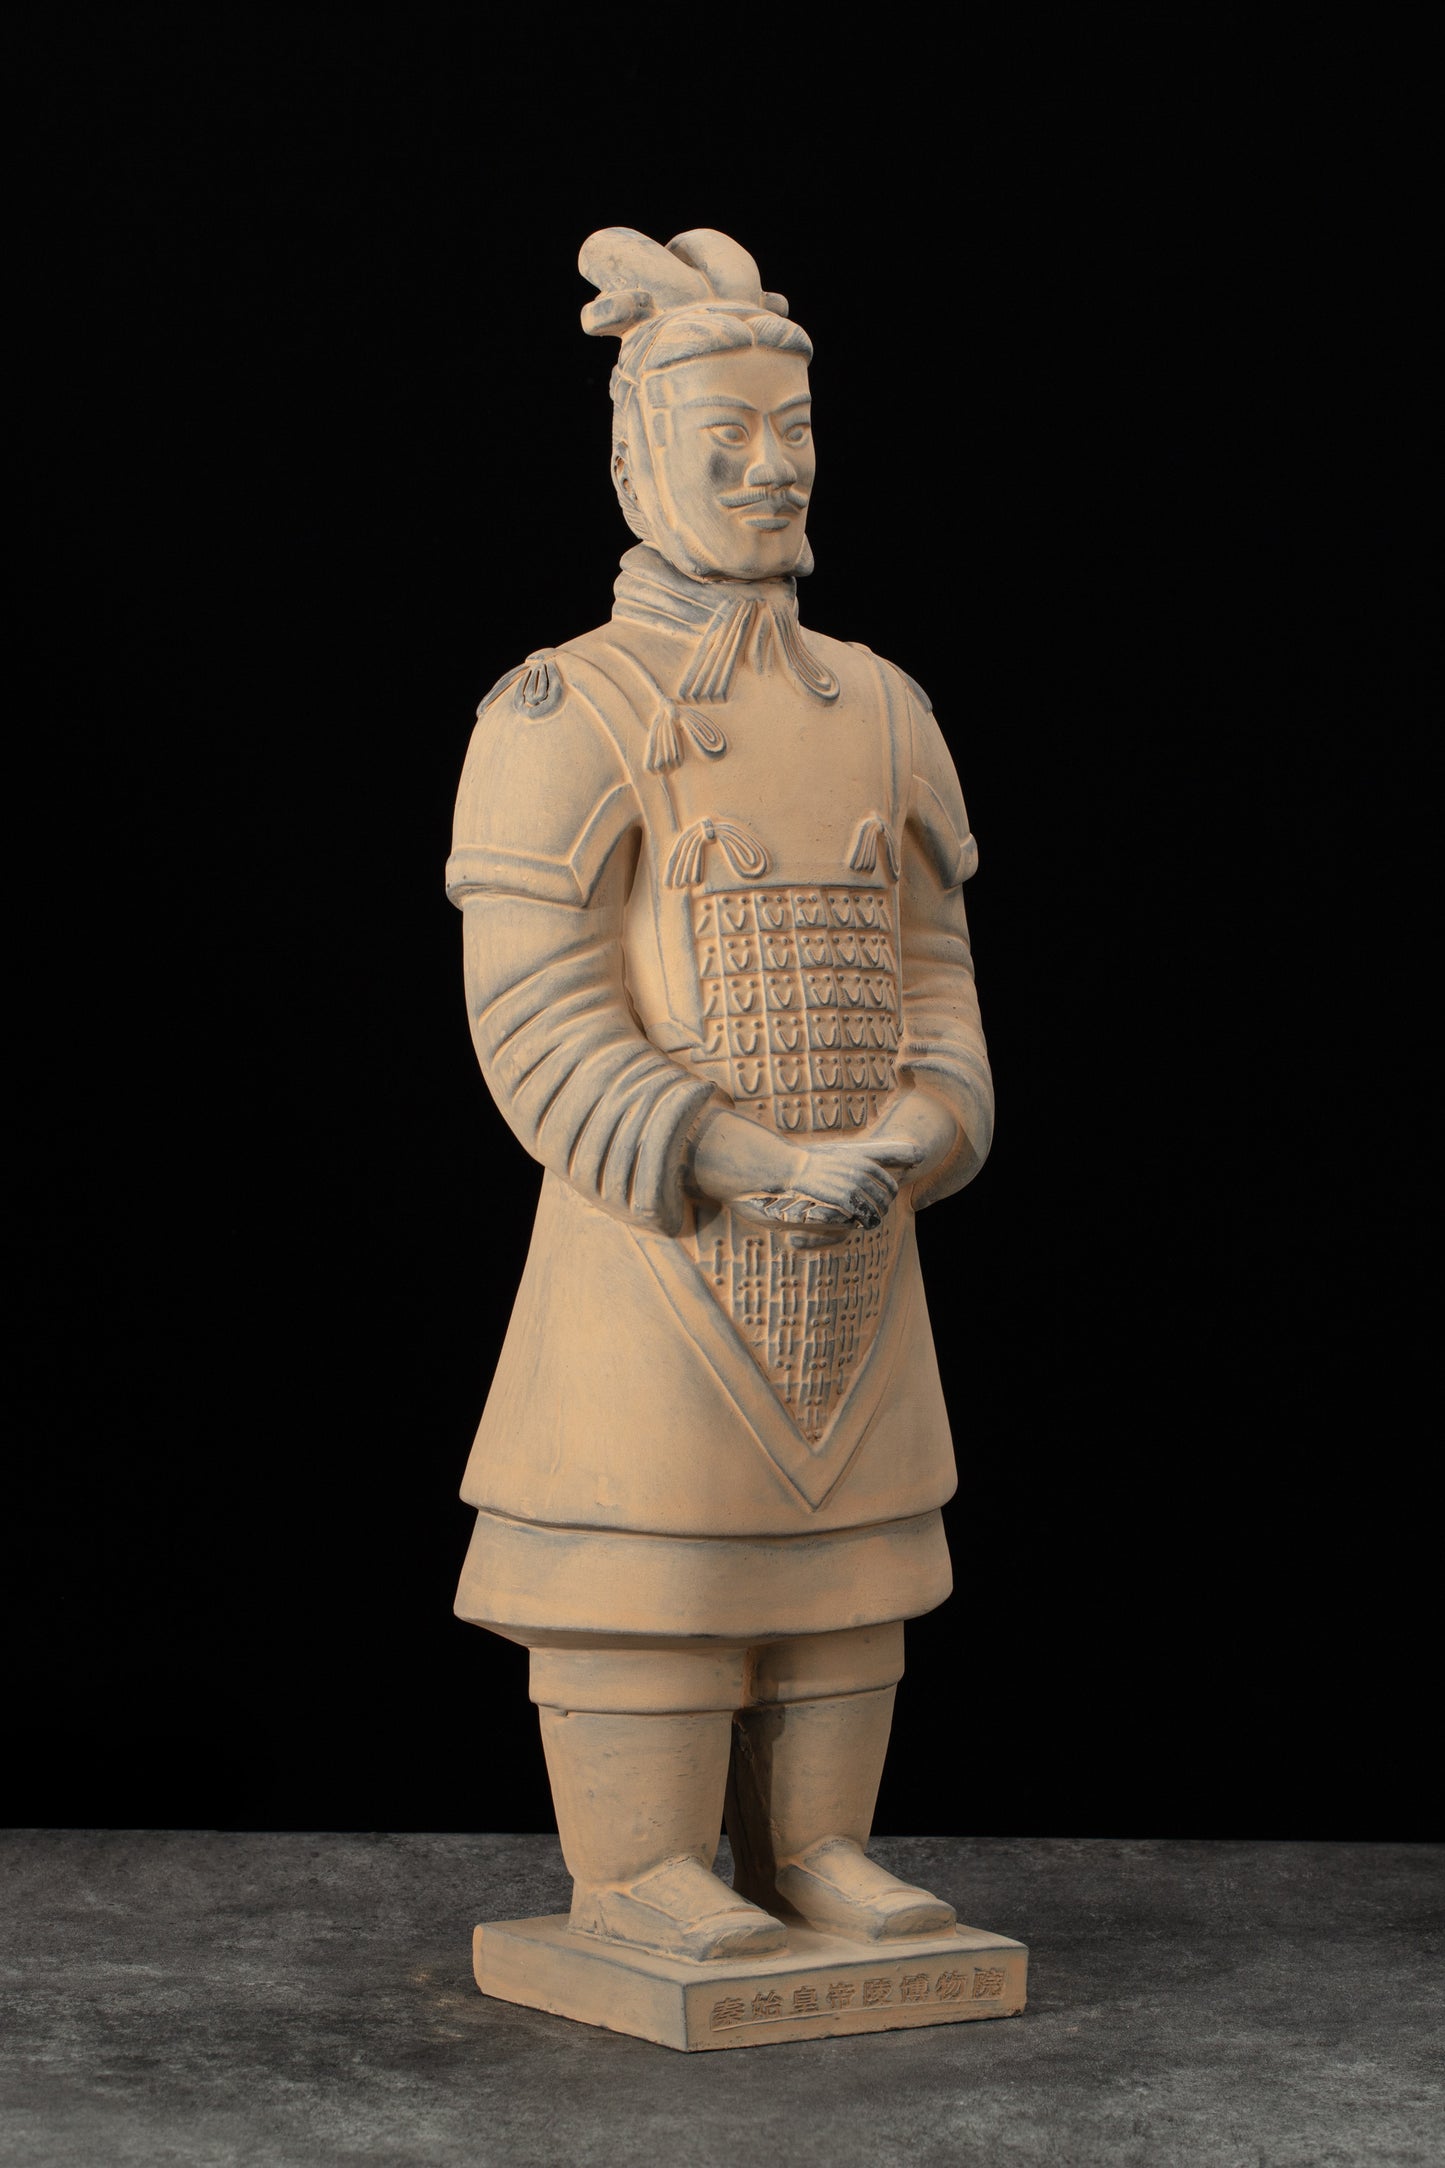 55CM General - CLAYARMY-Culturally Inspired: Side view of the 55CM General, illustrating cultural inspiration in the sculpting of ancient military uniforms and accessories.